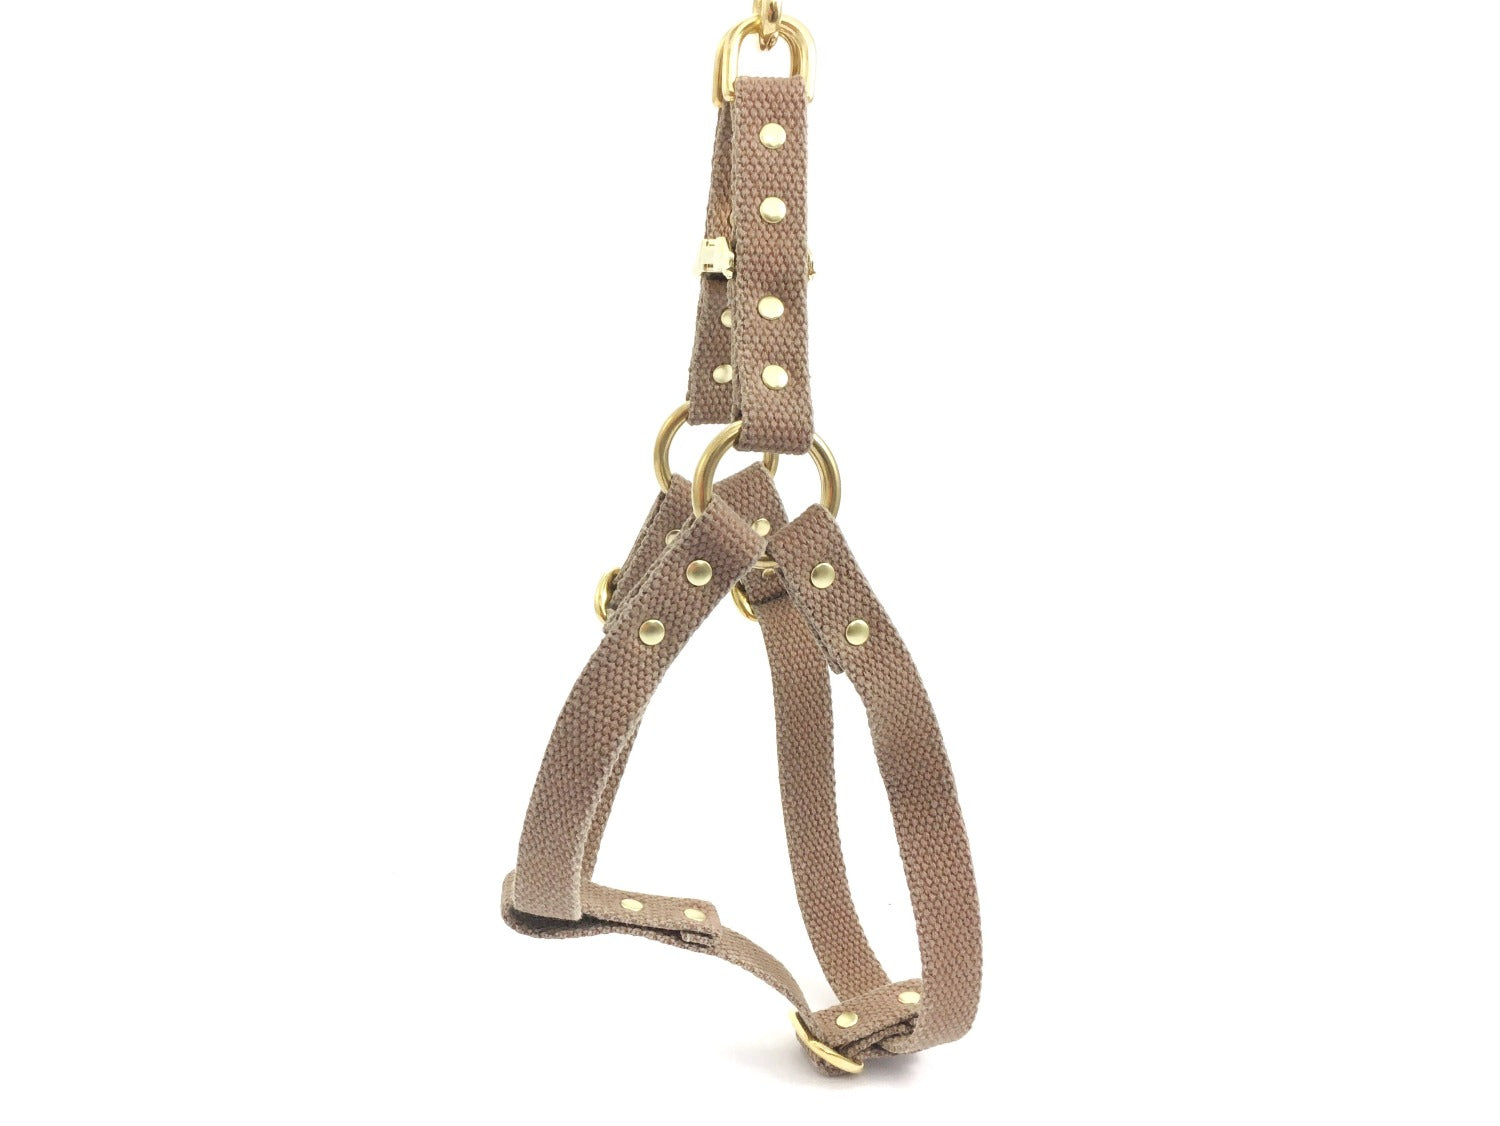 Tan brown dog and puppy harness in cotton webbing and luxury brass, made in the UK.